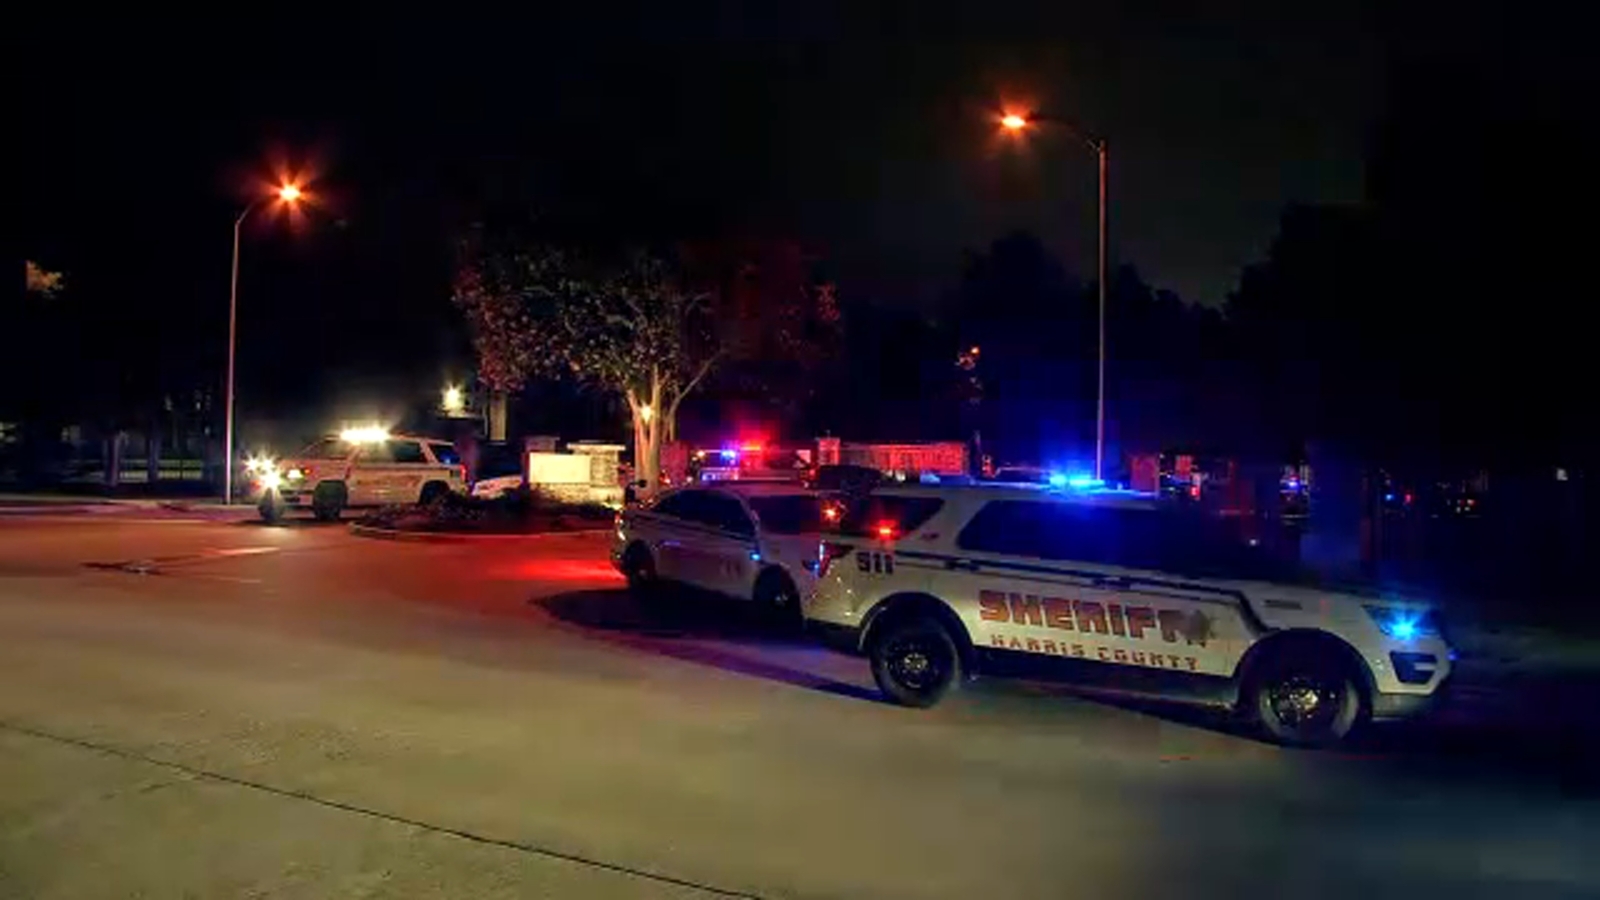 Harris County deputies shoot, kill suspect armed with knife on Palston Bend Lane in Villas at Northpark, sheriff’s office says [Video]